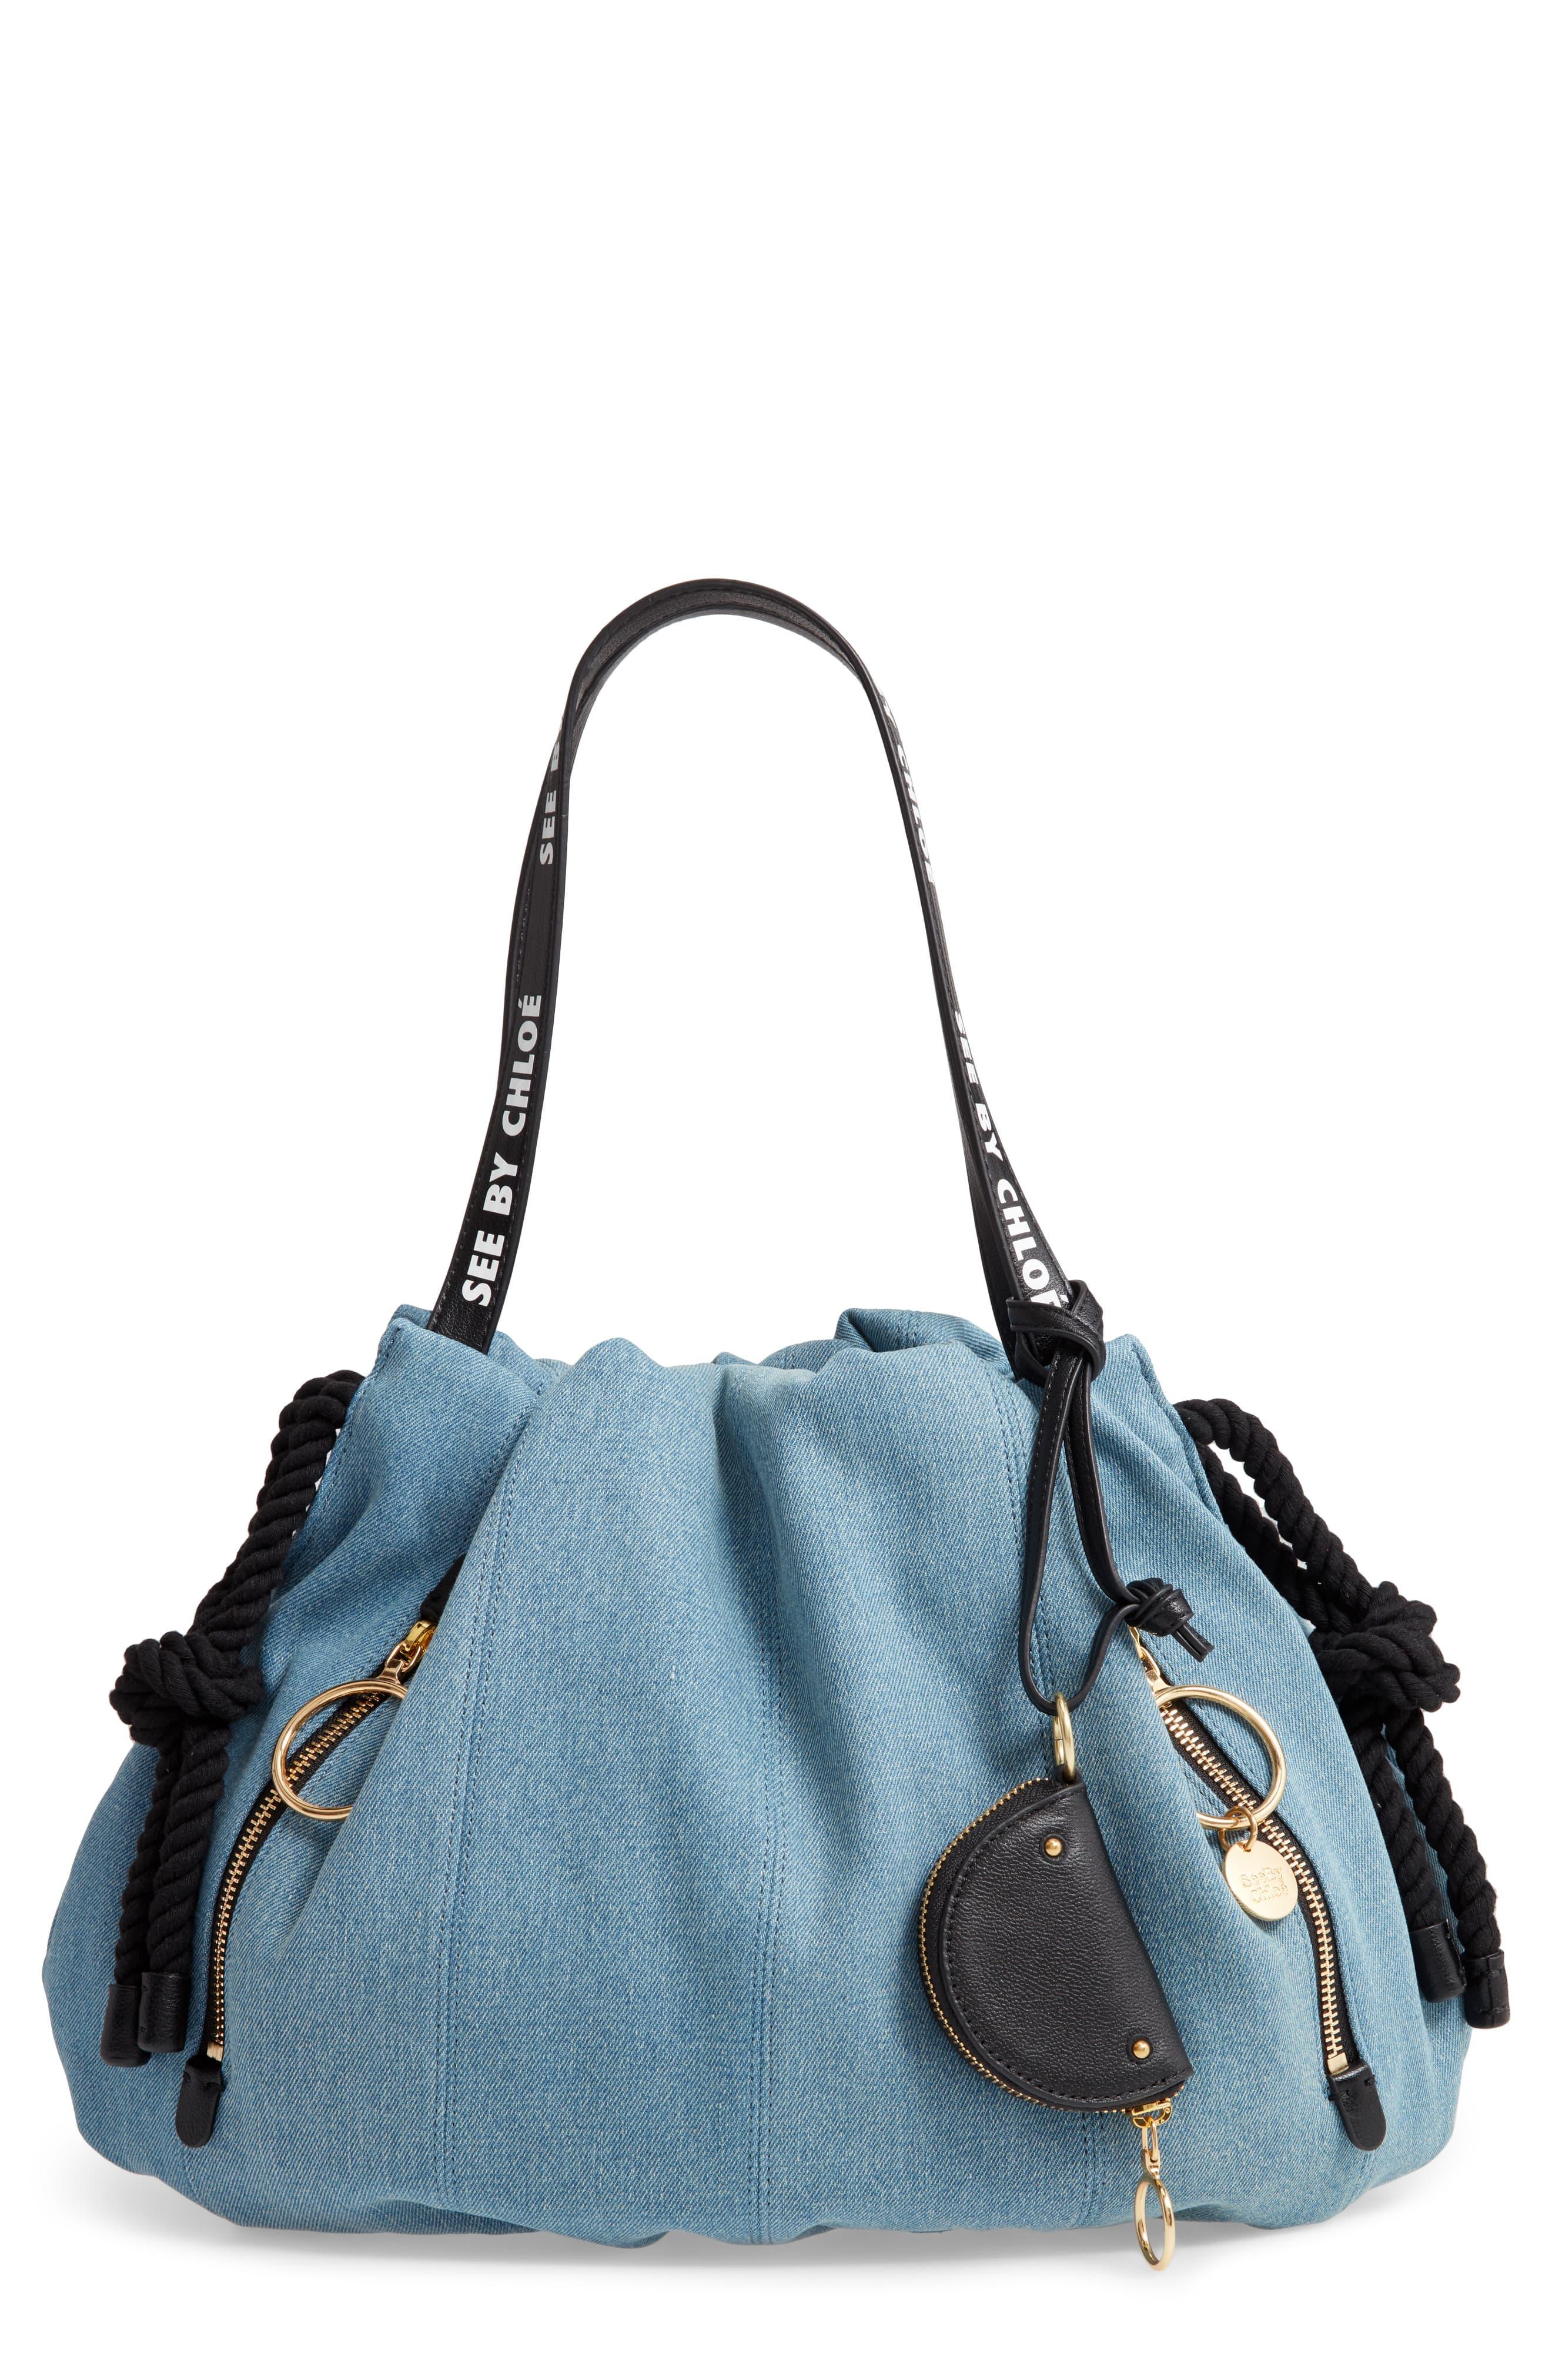 See By Chloé See By Chloé Flo Denim Tote in Blue - Lyst